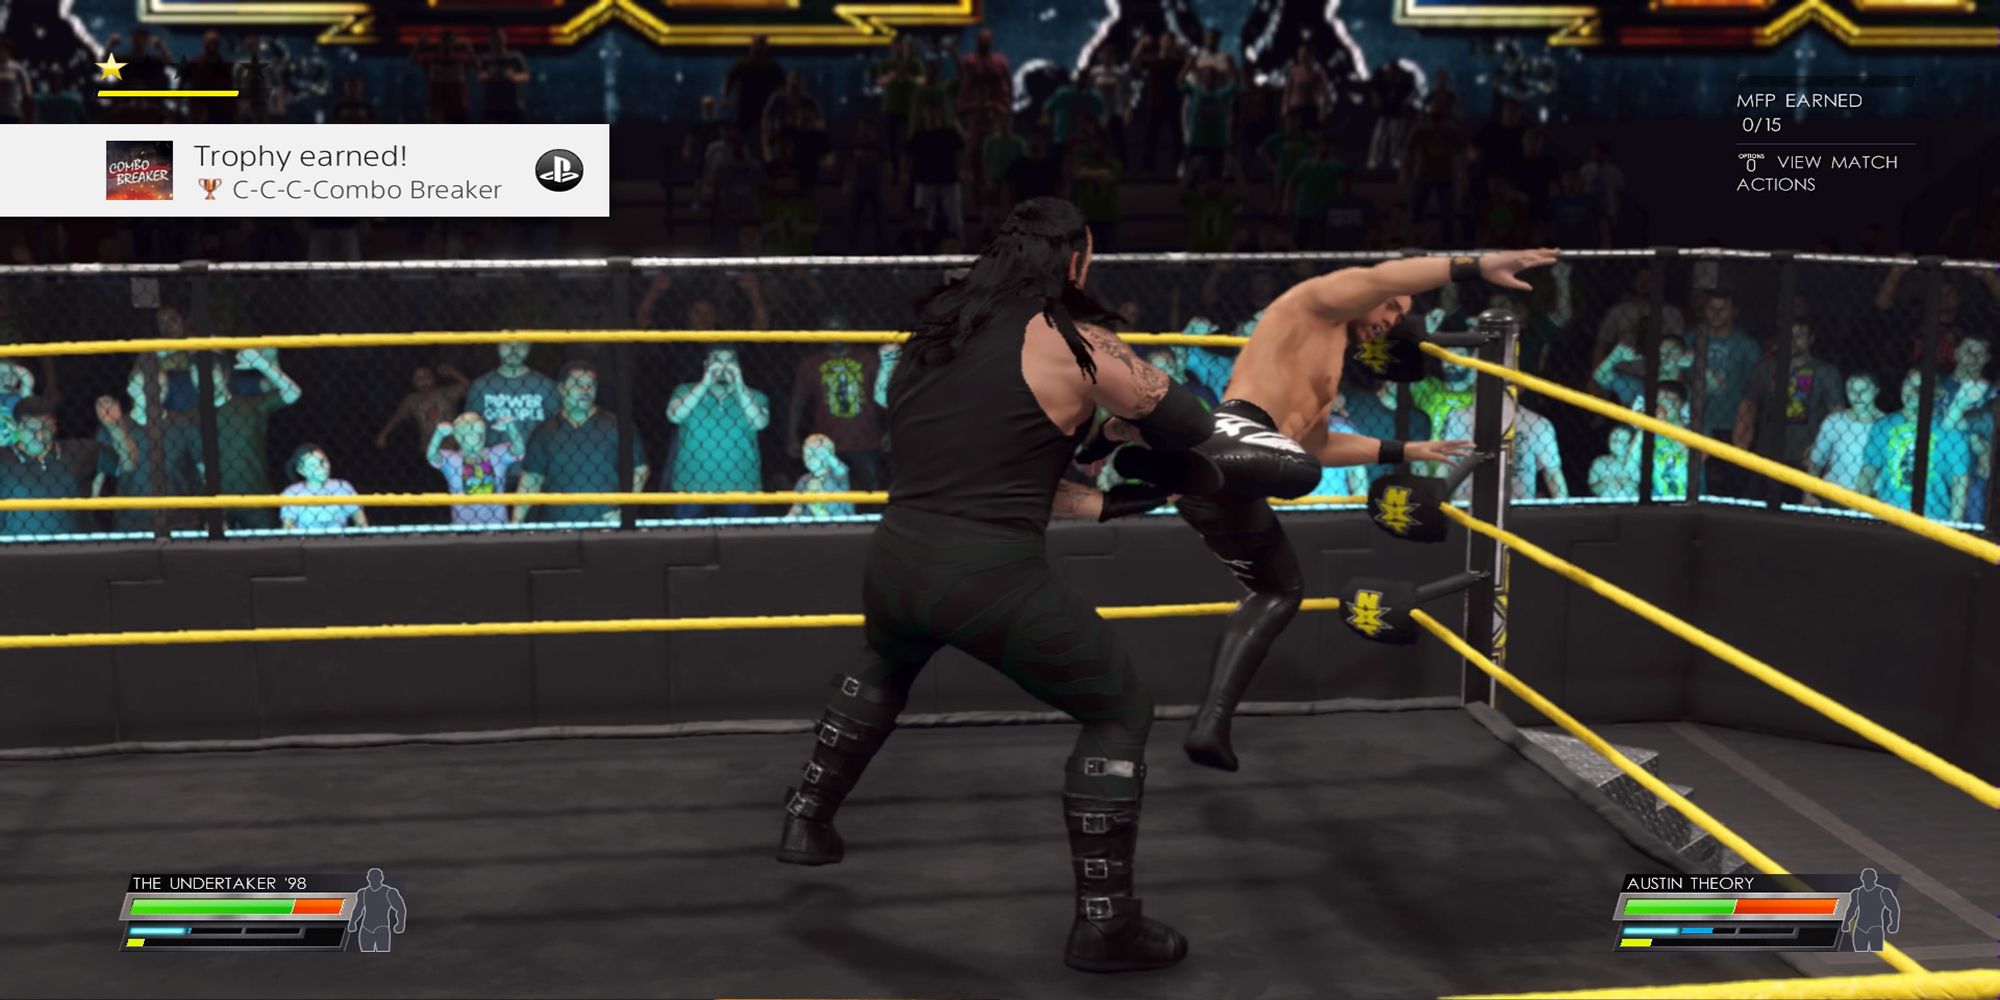 The Undertaker catches Austin Theory in a Combo Breaker at the NXT Arena. WWE 2K22.